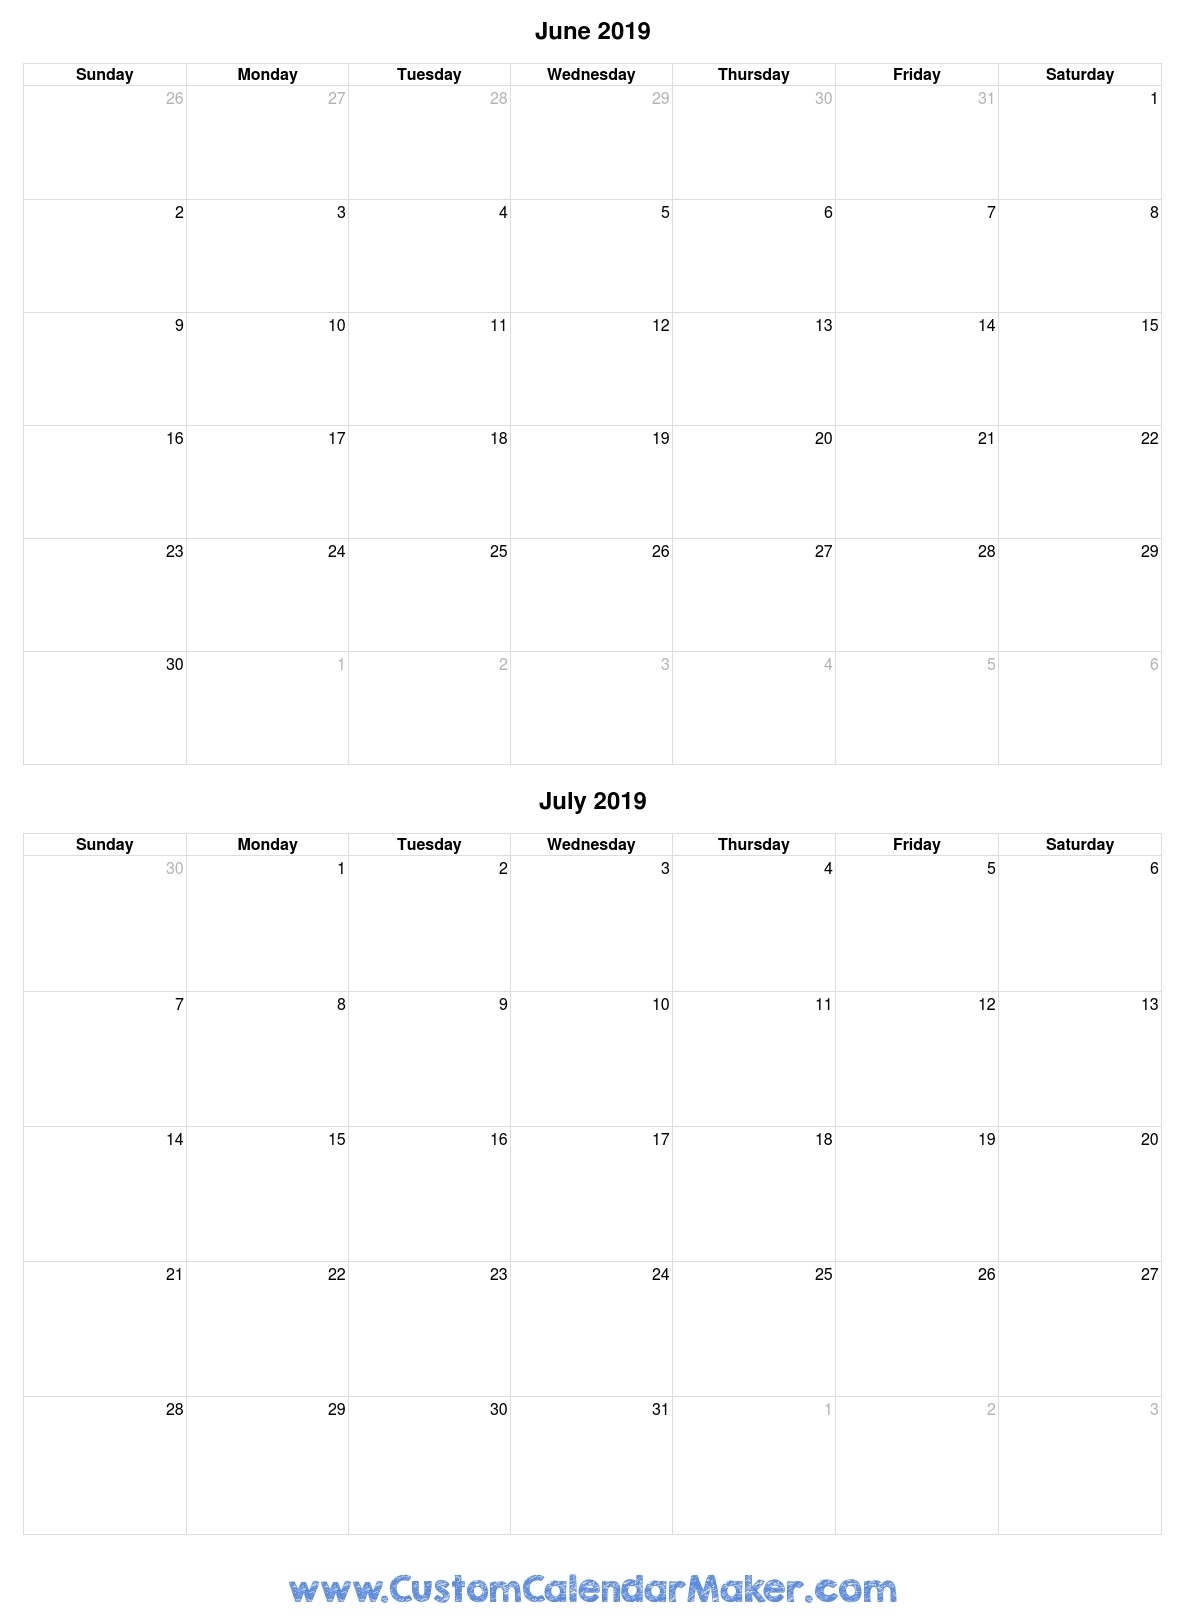 June And July 2019 Free Printable Calendar Template throughout Calendar For June And July